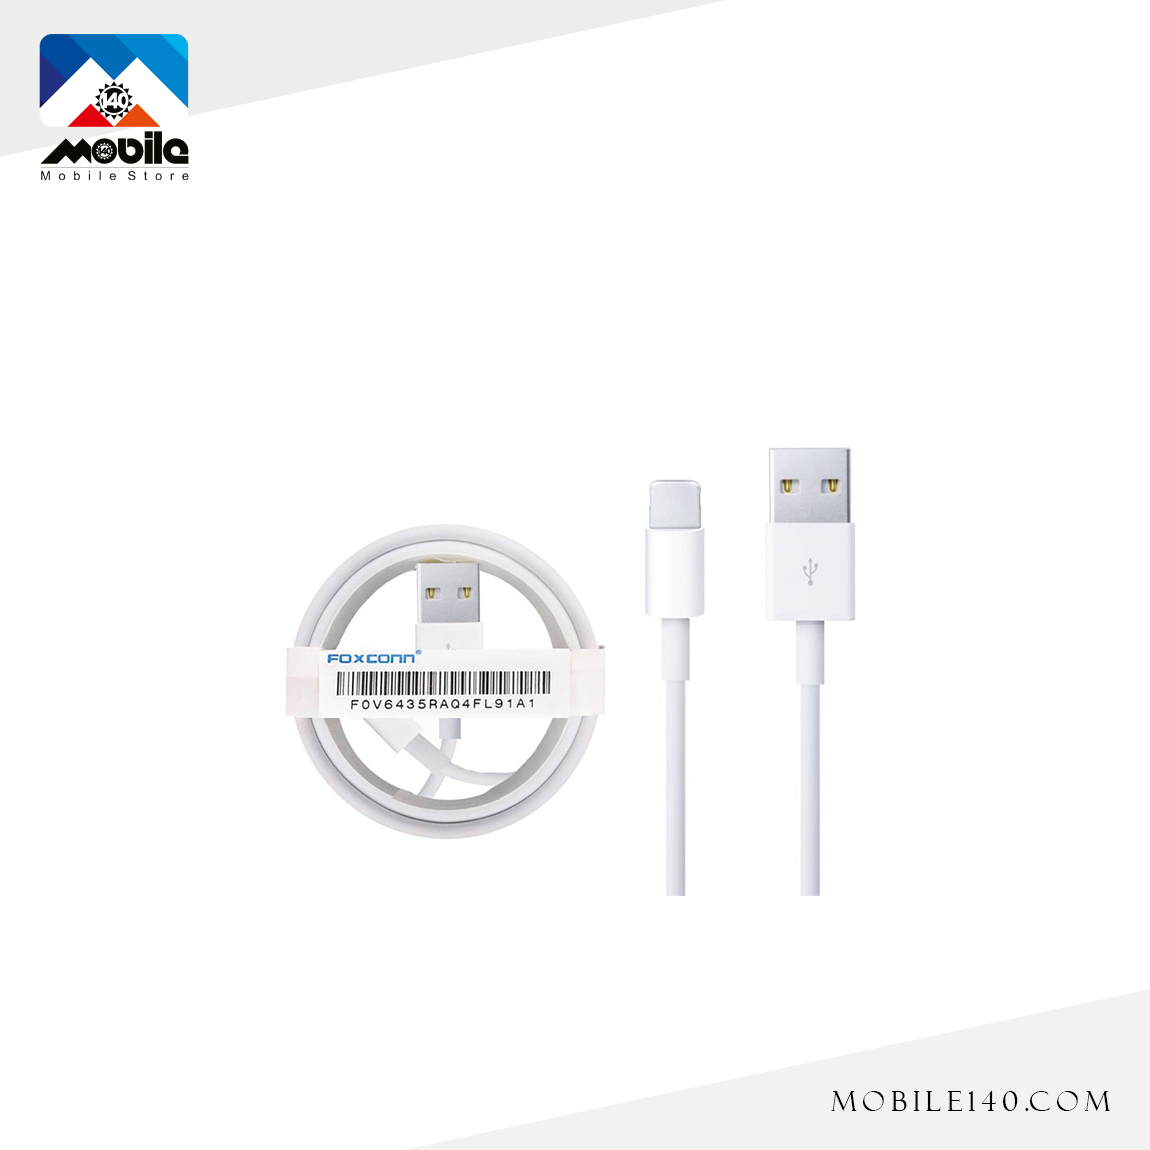 Foxconn Charging Cable for Apple iPhone 1